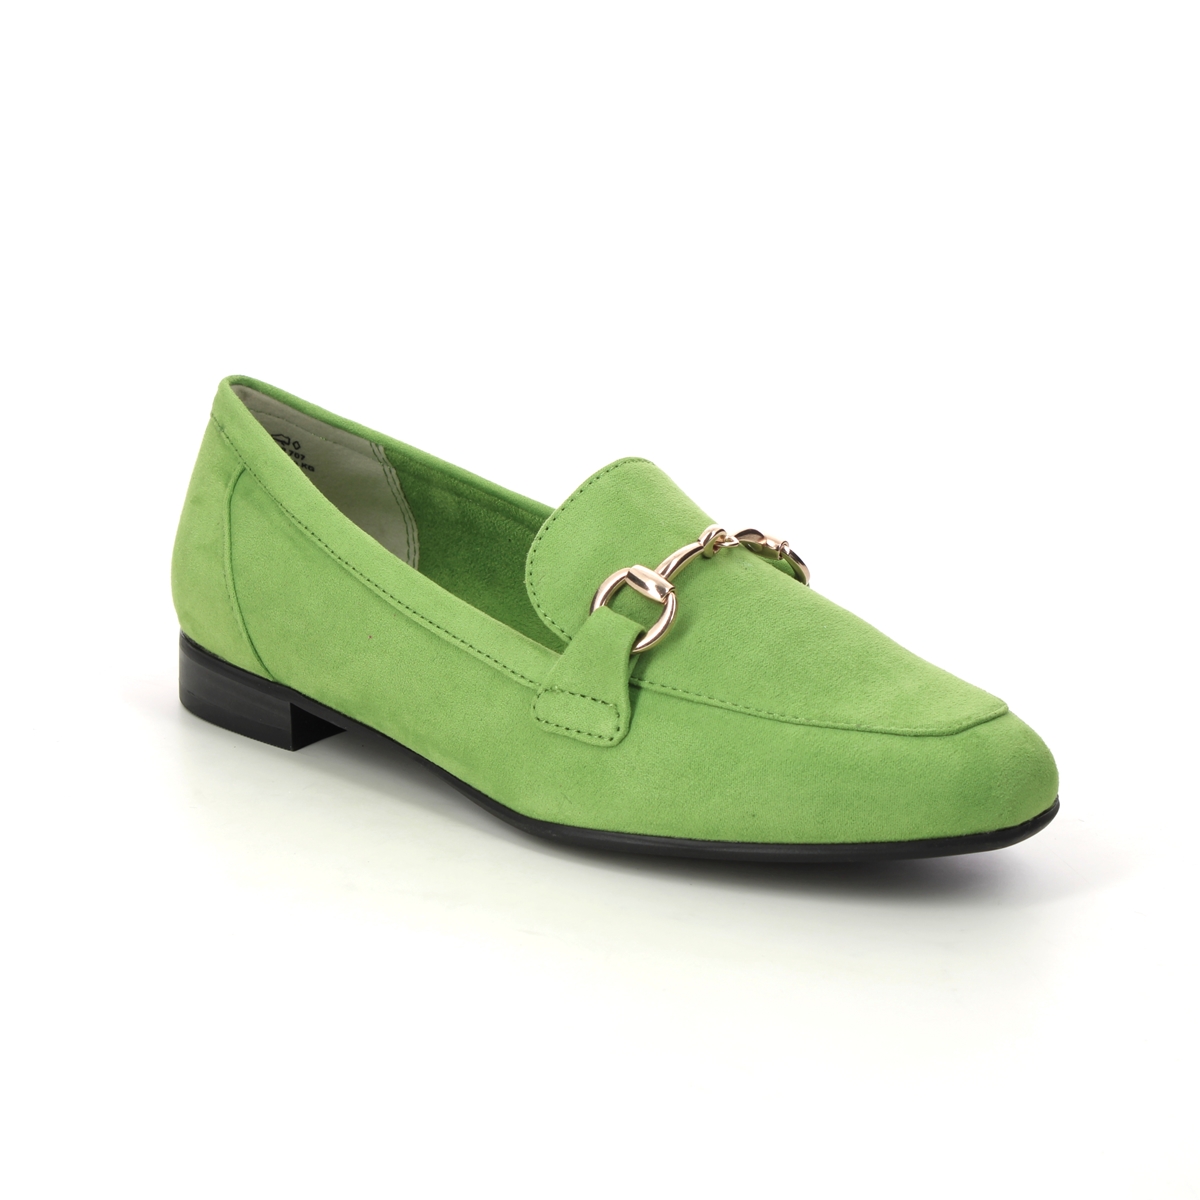 Marco Tozzi Serina Apple Green Womens loafers 24212-42-707 in a Plain Textile in Size 36